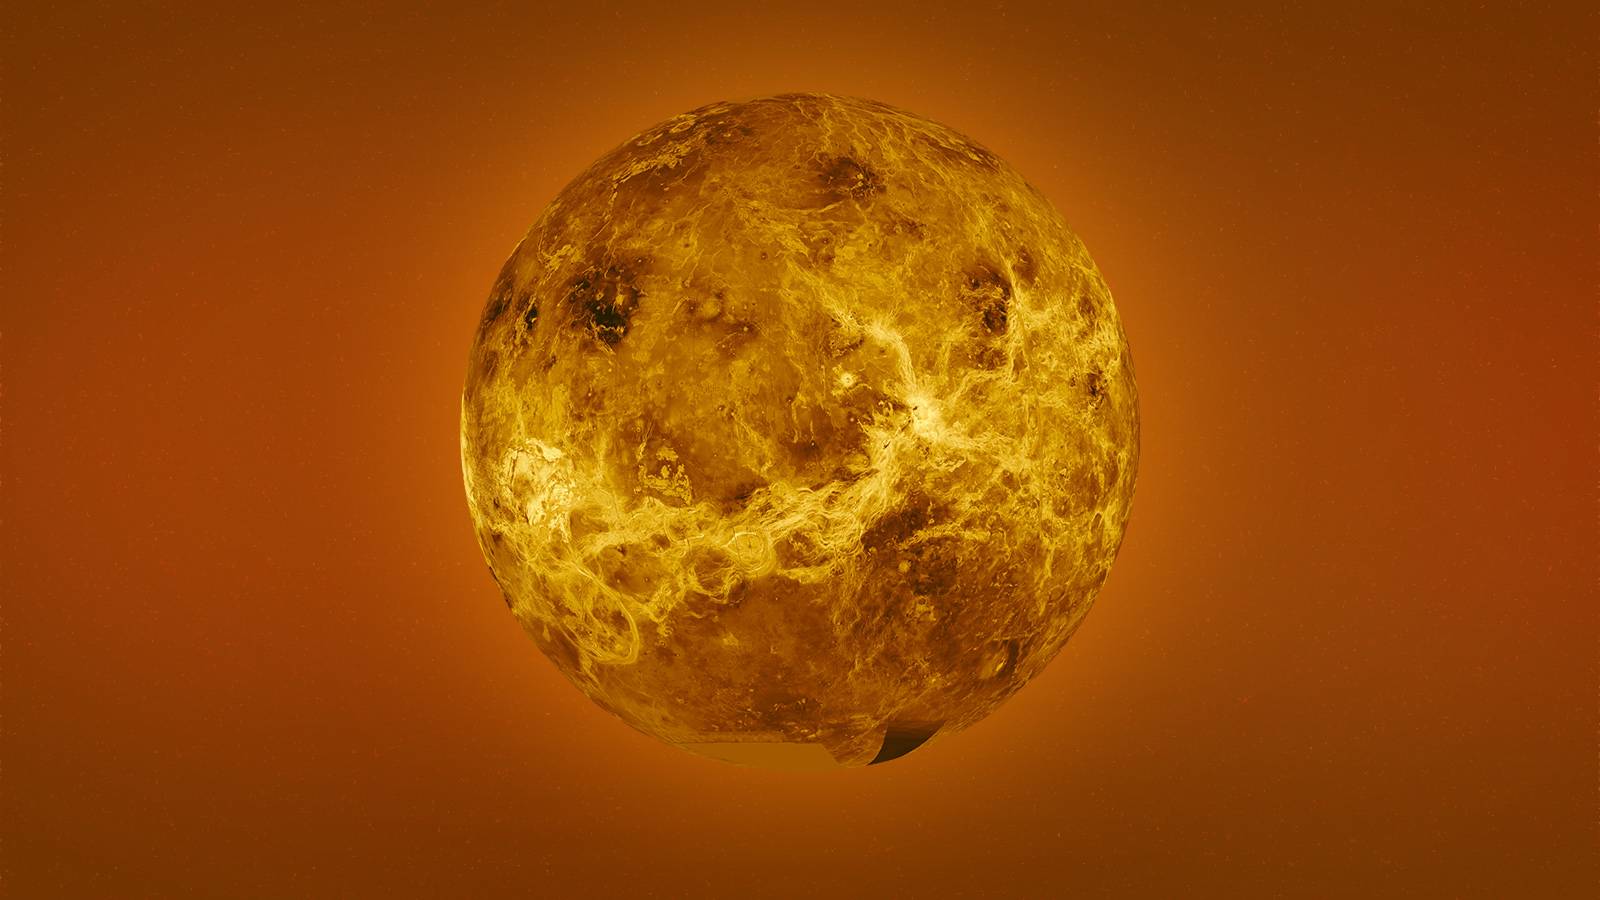 Planet Venus by day